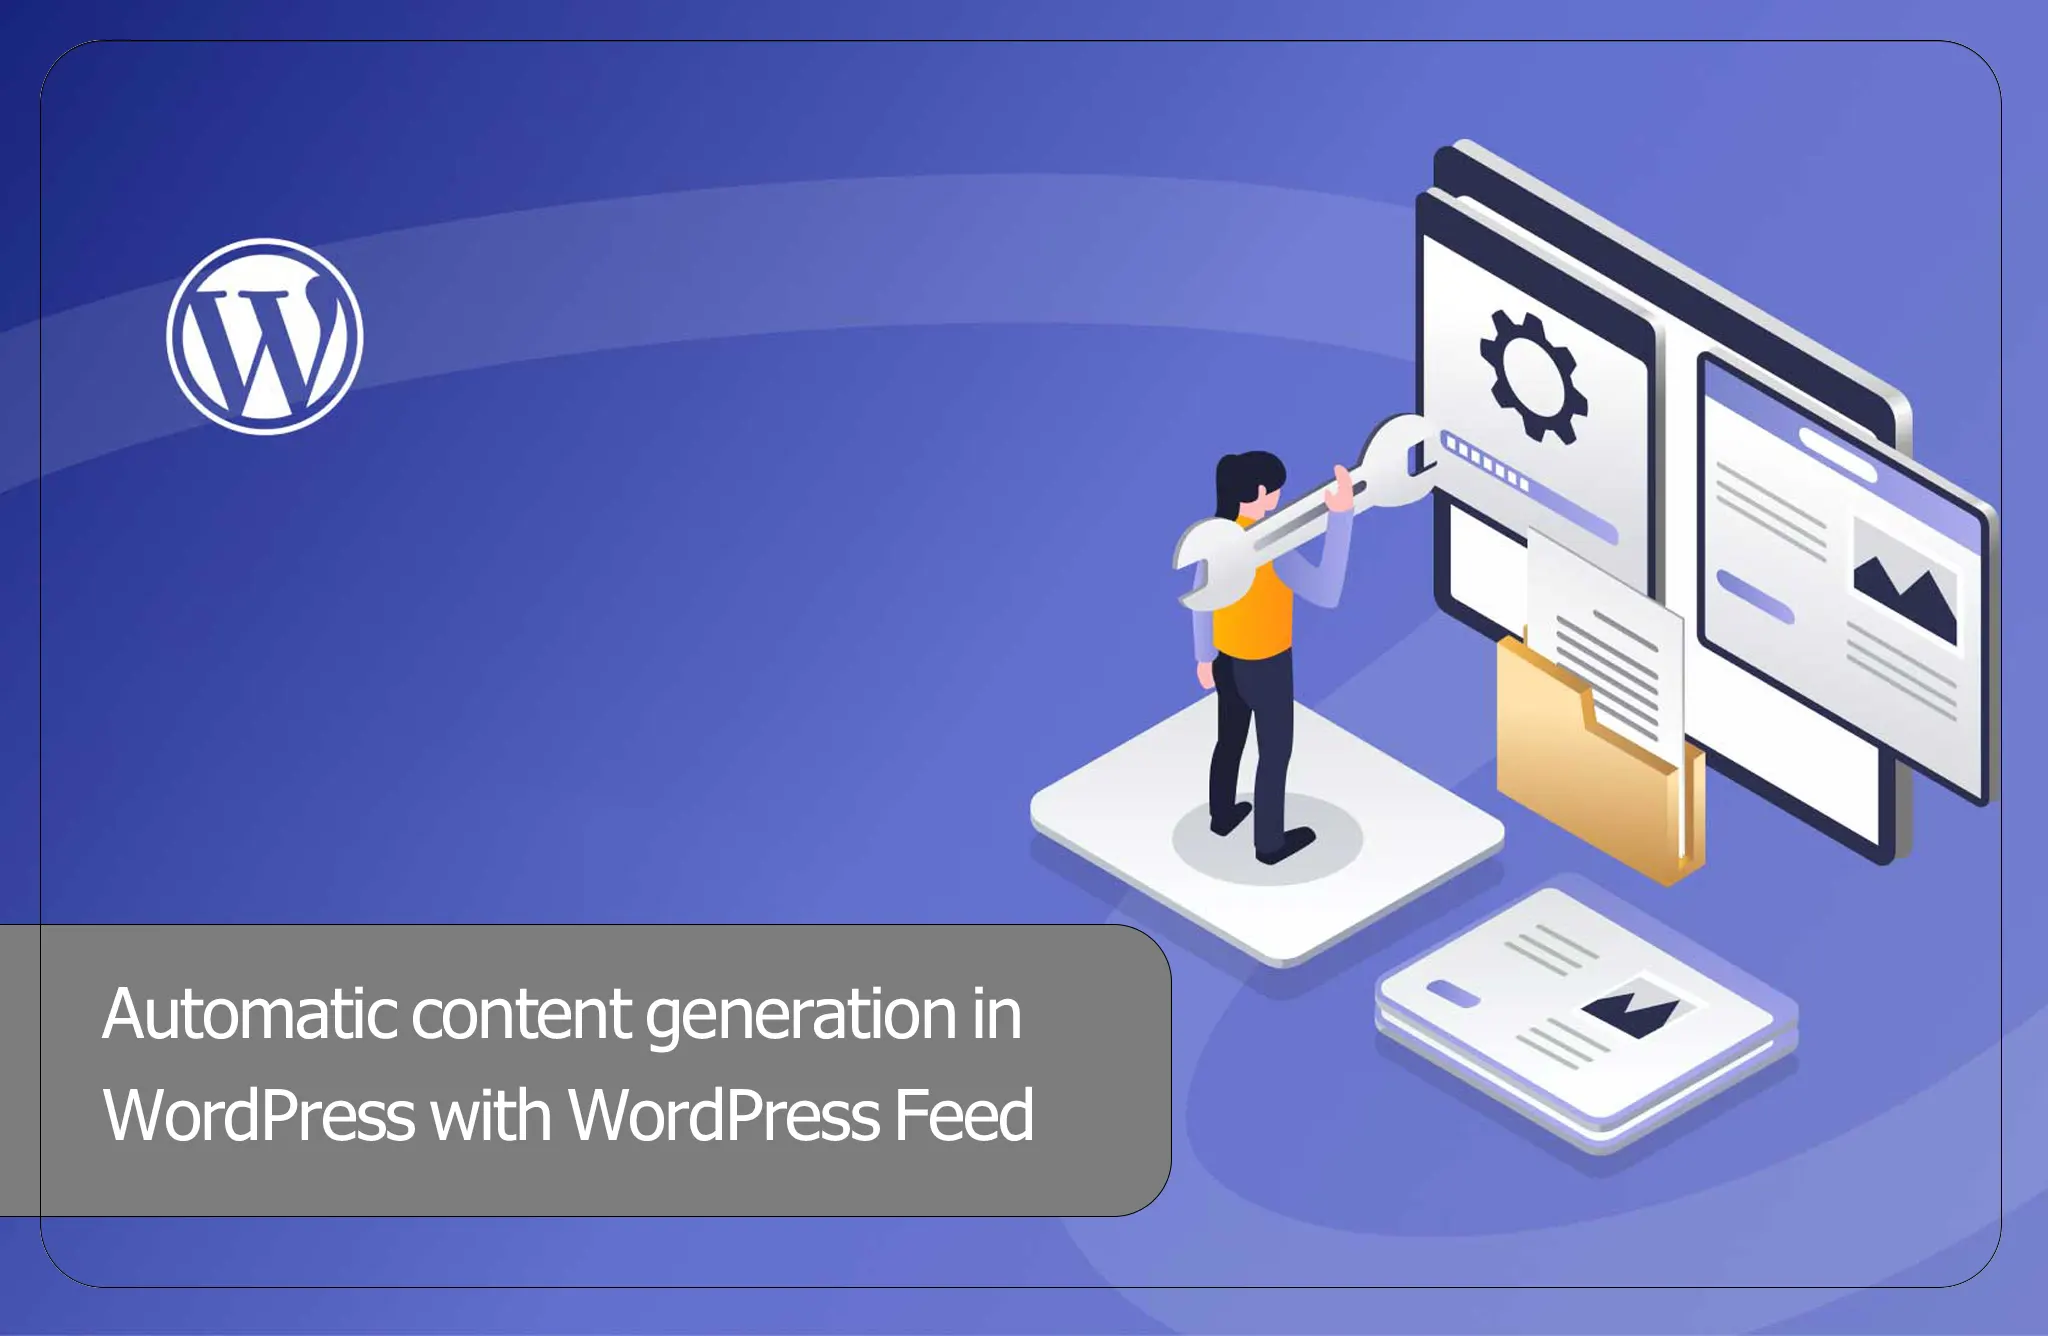 Automatic content generation in WordPress with WordPress Feed